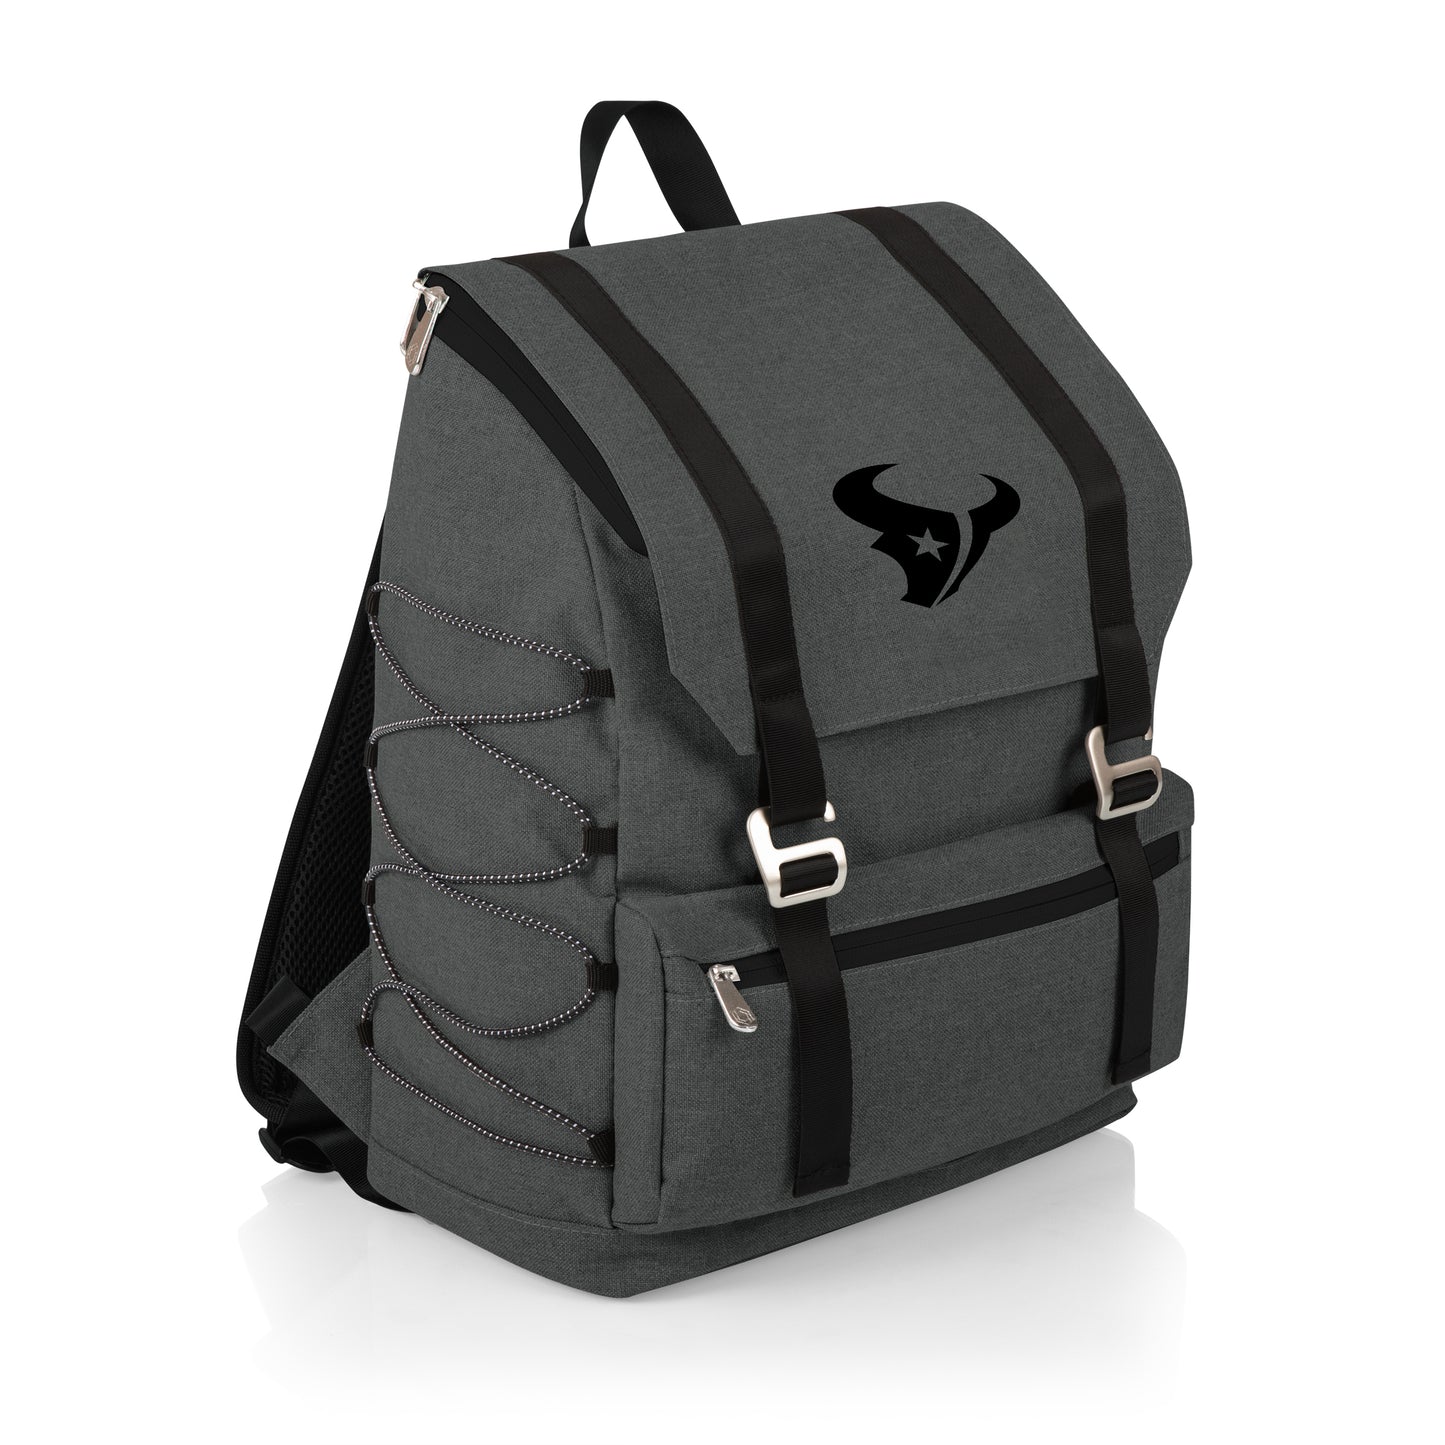 Houston Texans - On The Go Traverse Cooler Backpack